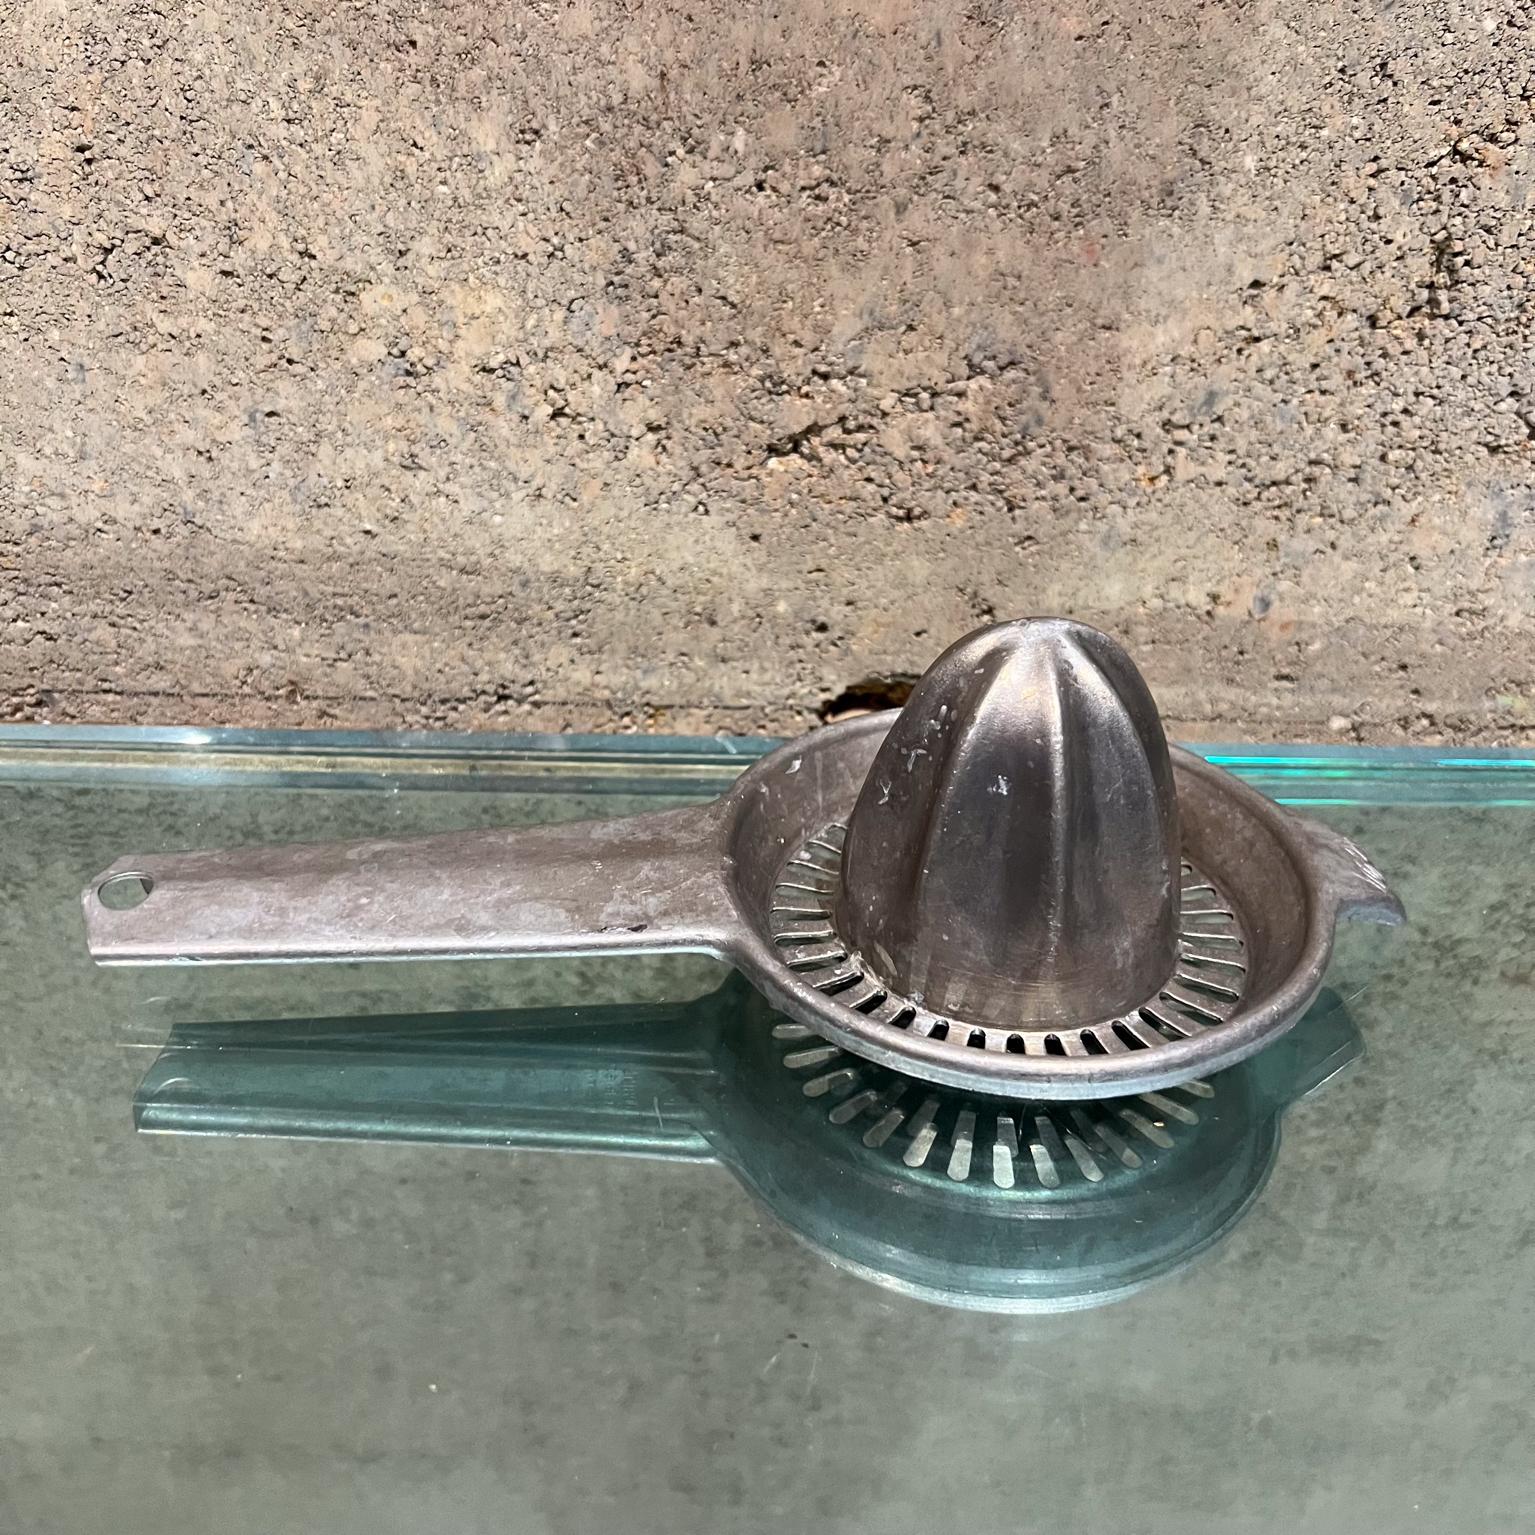 AMBIANIC presents
1960s Foley Aluminum Hand Juicer
Citrus Juicer Reamer
2.5 h x 4 d x 8 long
Perfect for your airstream style.
Handy Center hole to hang utensil
Maker stamp present
Original unrestored preowned vintage condition
Vintage wear